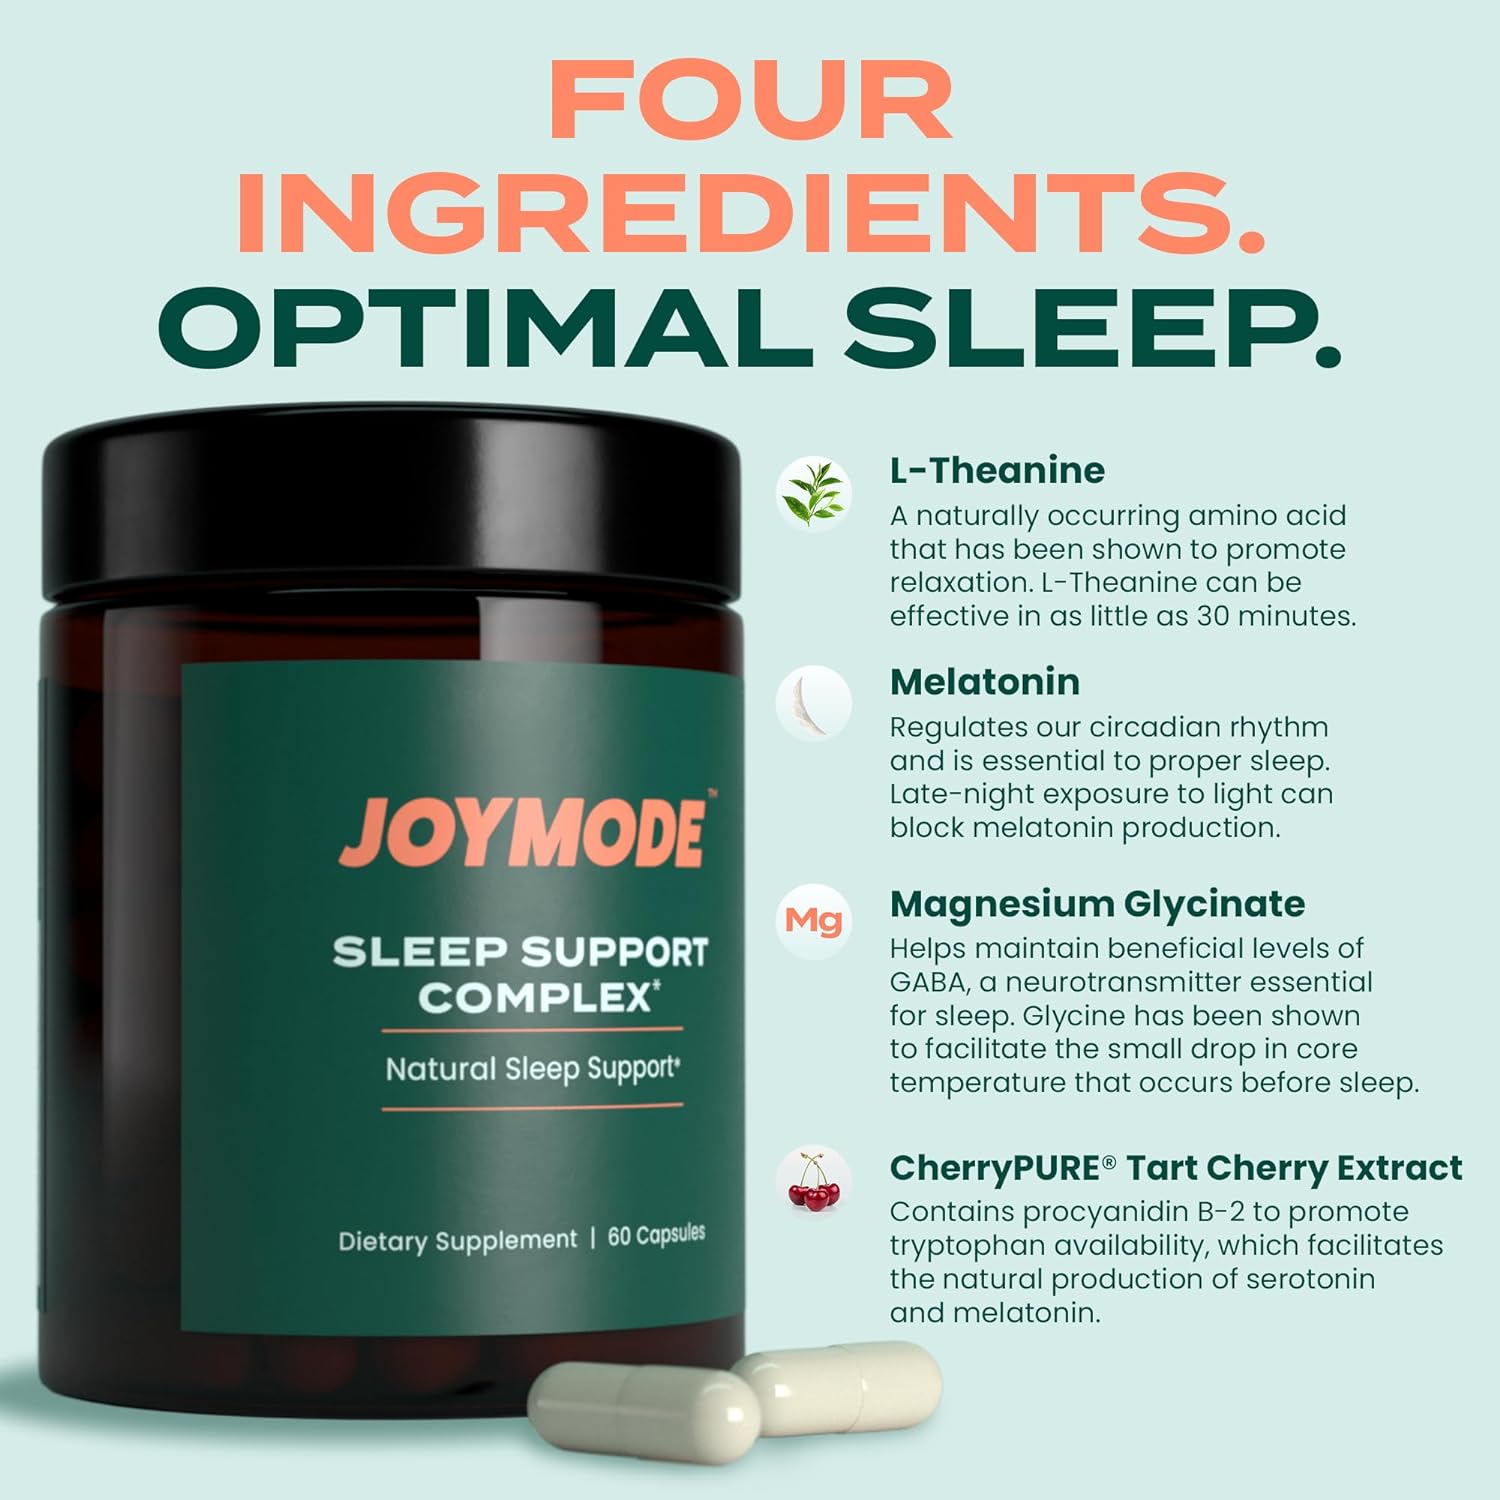 JOYMODE Sleep Aid Supplement for Adults (60 ct) with L Theanine, Melatonin  125mg Magnesium Glycinate, 500mg Tart Cherry Extract from CherryPURE for Sleep Support